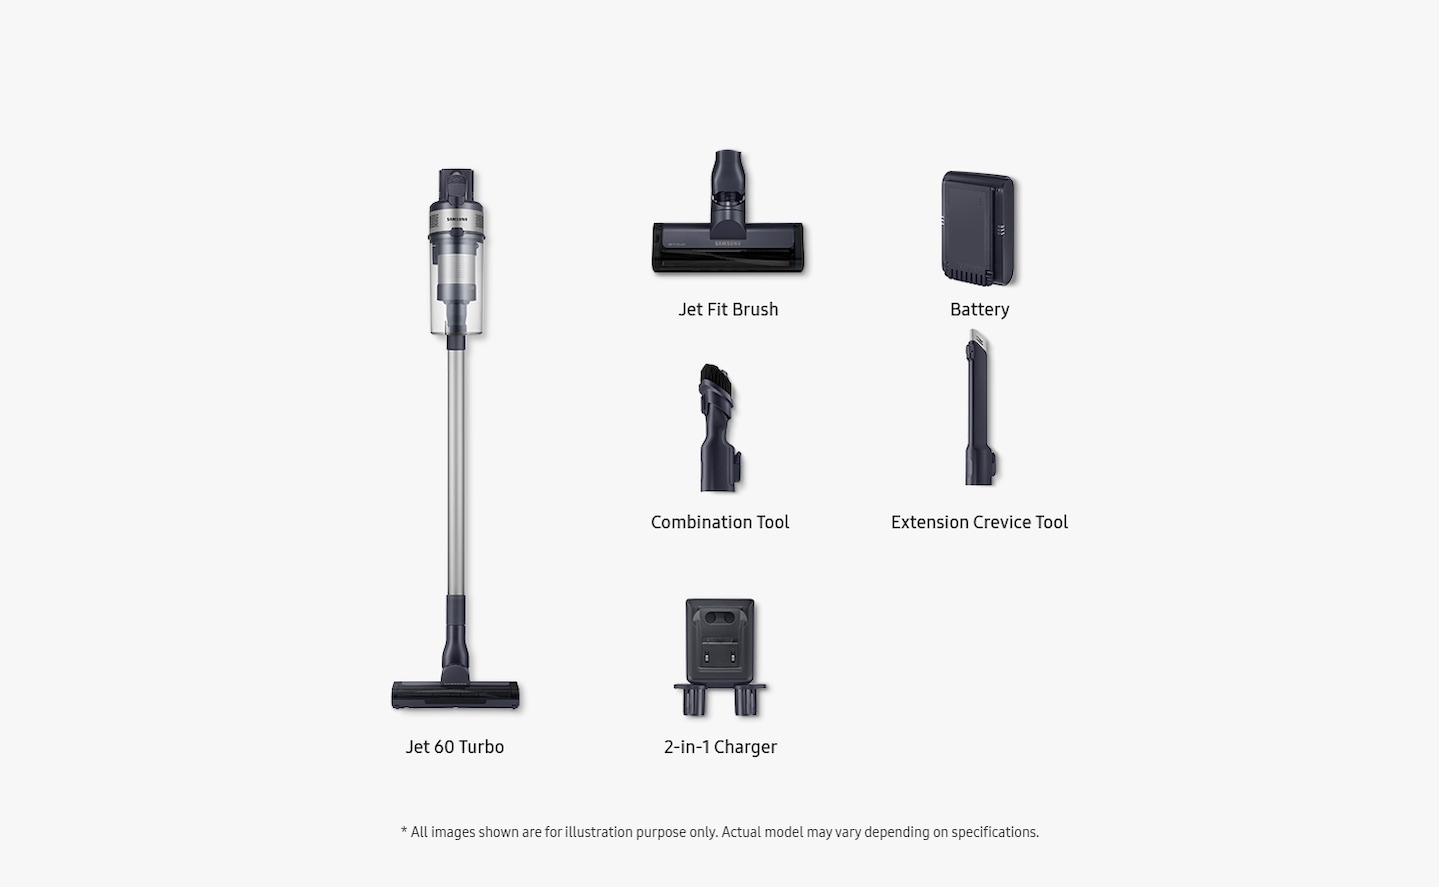 Items included inbox shown: Jet 60 Turbo, jet fit brush, battery, combination tool, extension crevice tool and 2-in-1 charger.All images shown are for illustration purpose only. Actual model may vary depending on specifications.